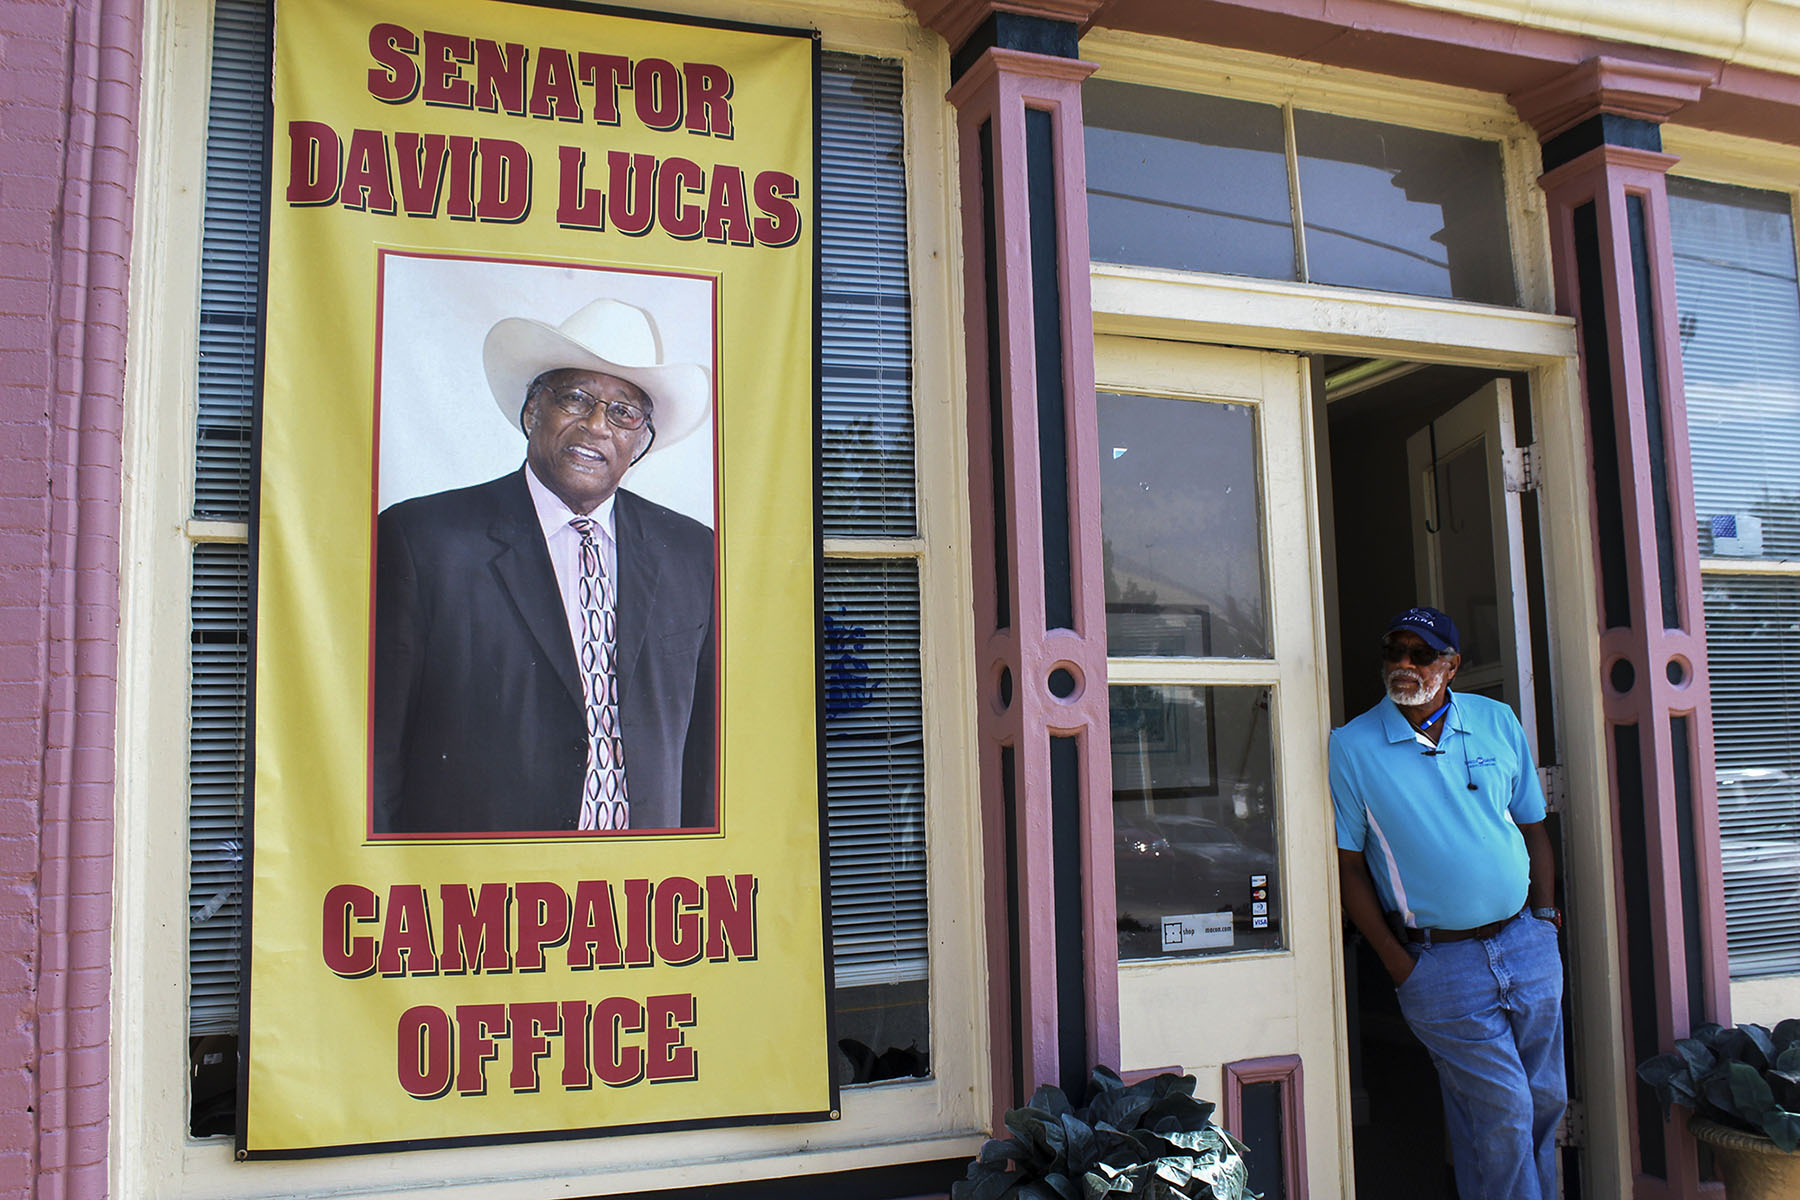 David Lucas has served the East Macon area as a state senator since 2012. In his childhood, he said he had a near-death experience that inspired him to pursue a political career. (Photo and audio by Phillip Jackson/News21)